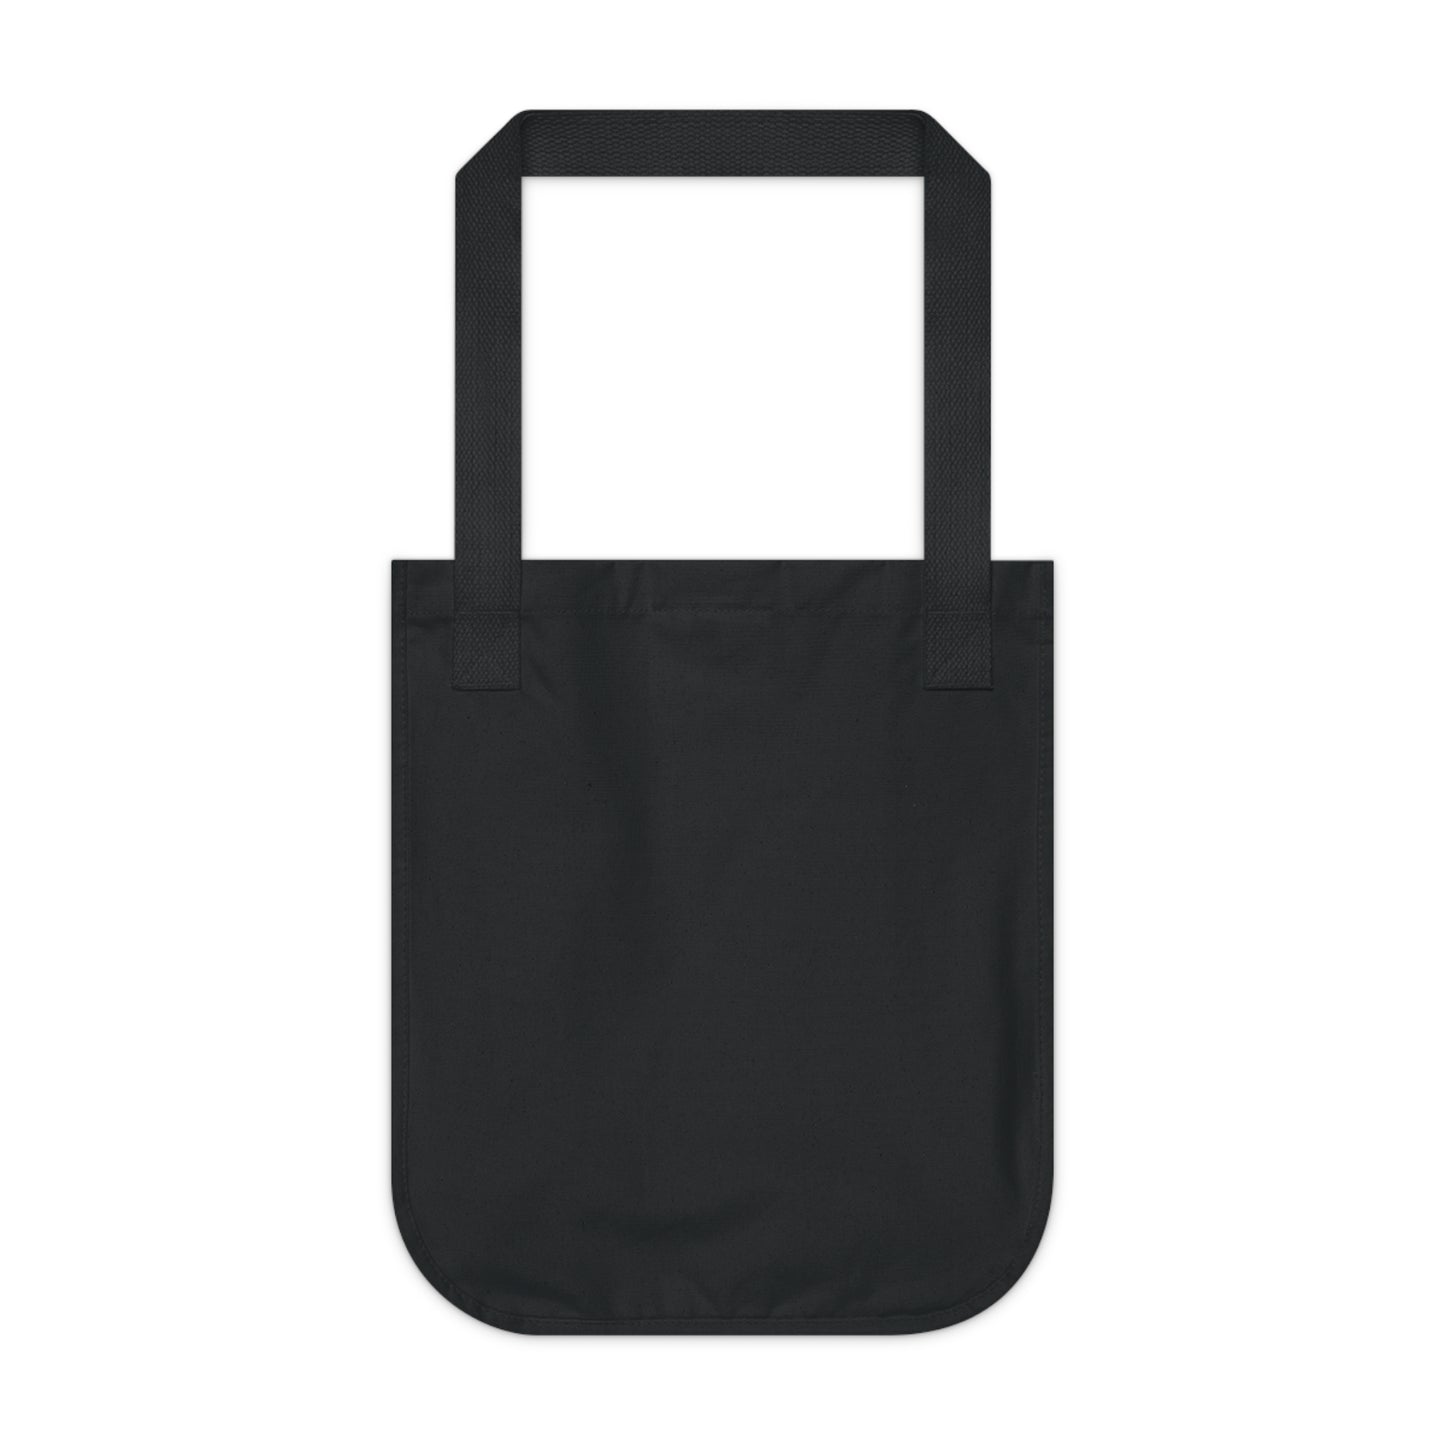 "Capturing a Moment in Time through Personal Visual Language" - Bam Boo! Lifestyle Eco-friendly Tote Bag